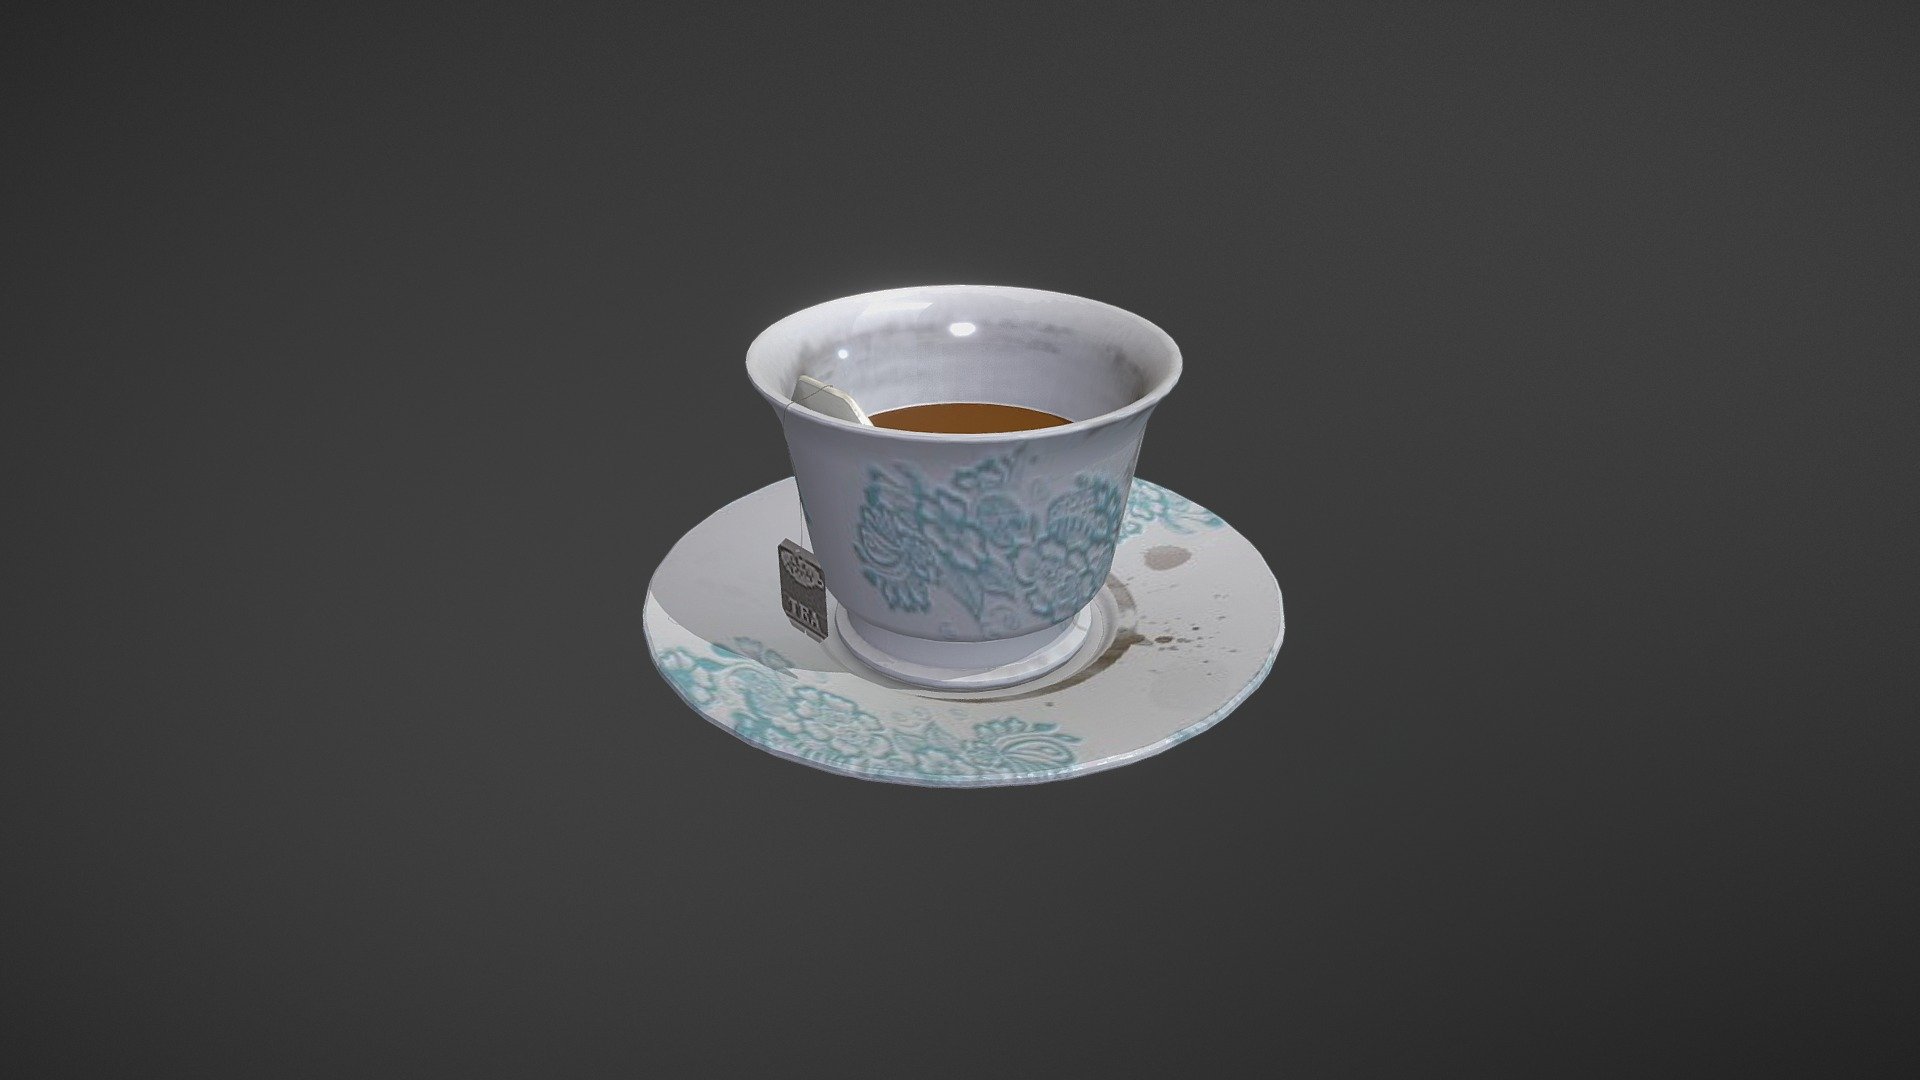 One of the assets I am going to use for my still life scene. Still getting familiar with Substance Painter and PBR, had some issues with painting the details (tea stains and such) because the colour on the asset does not really match the colour I chose 3d model